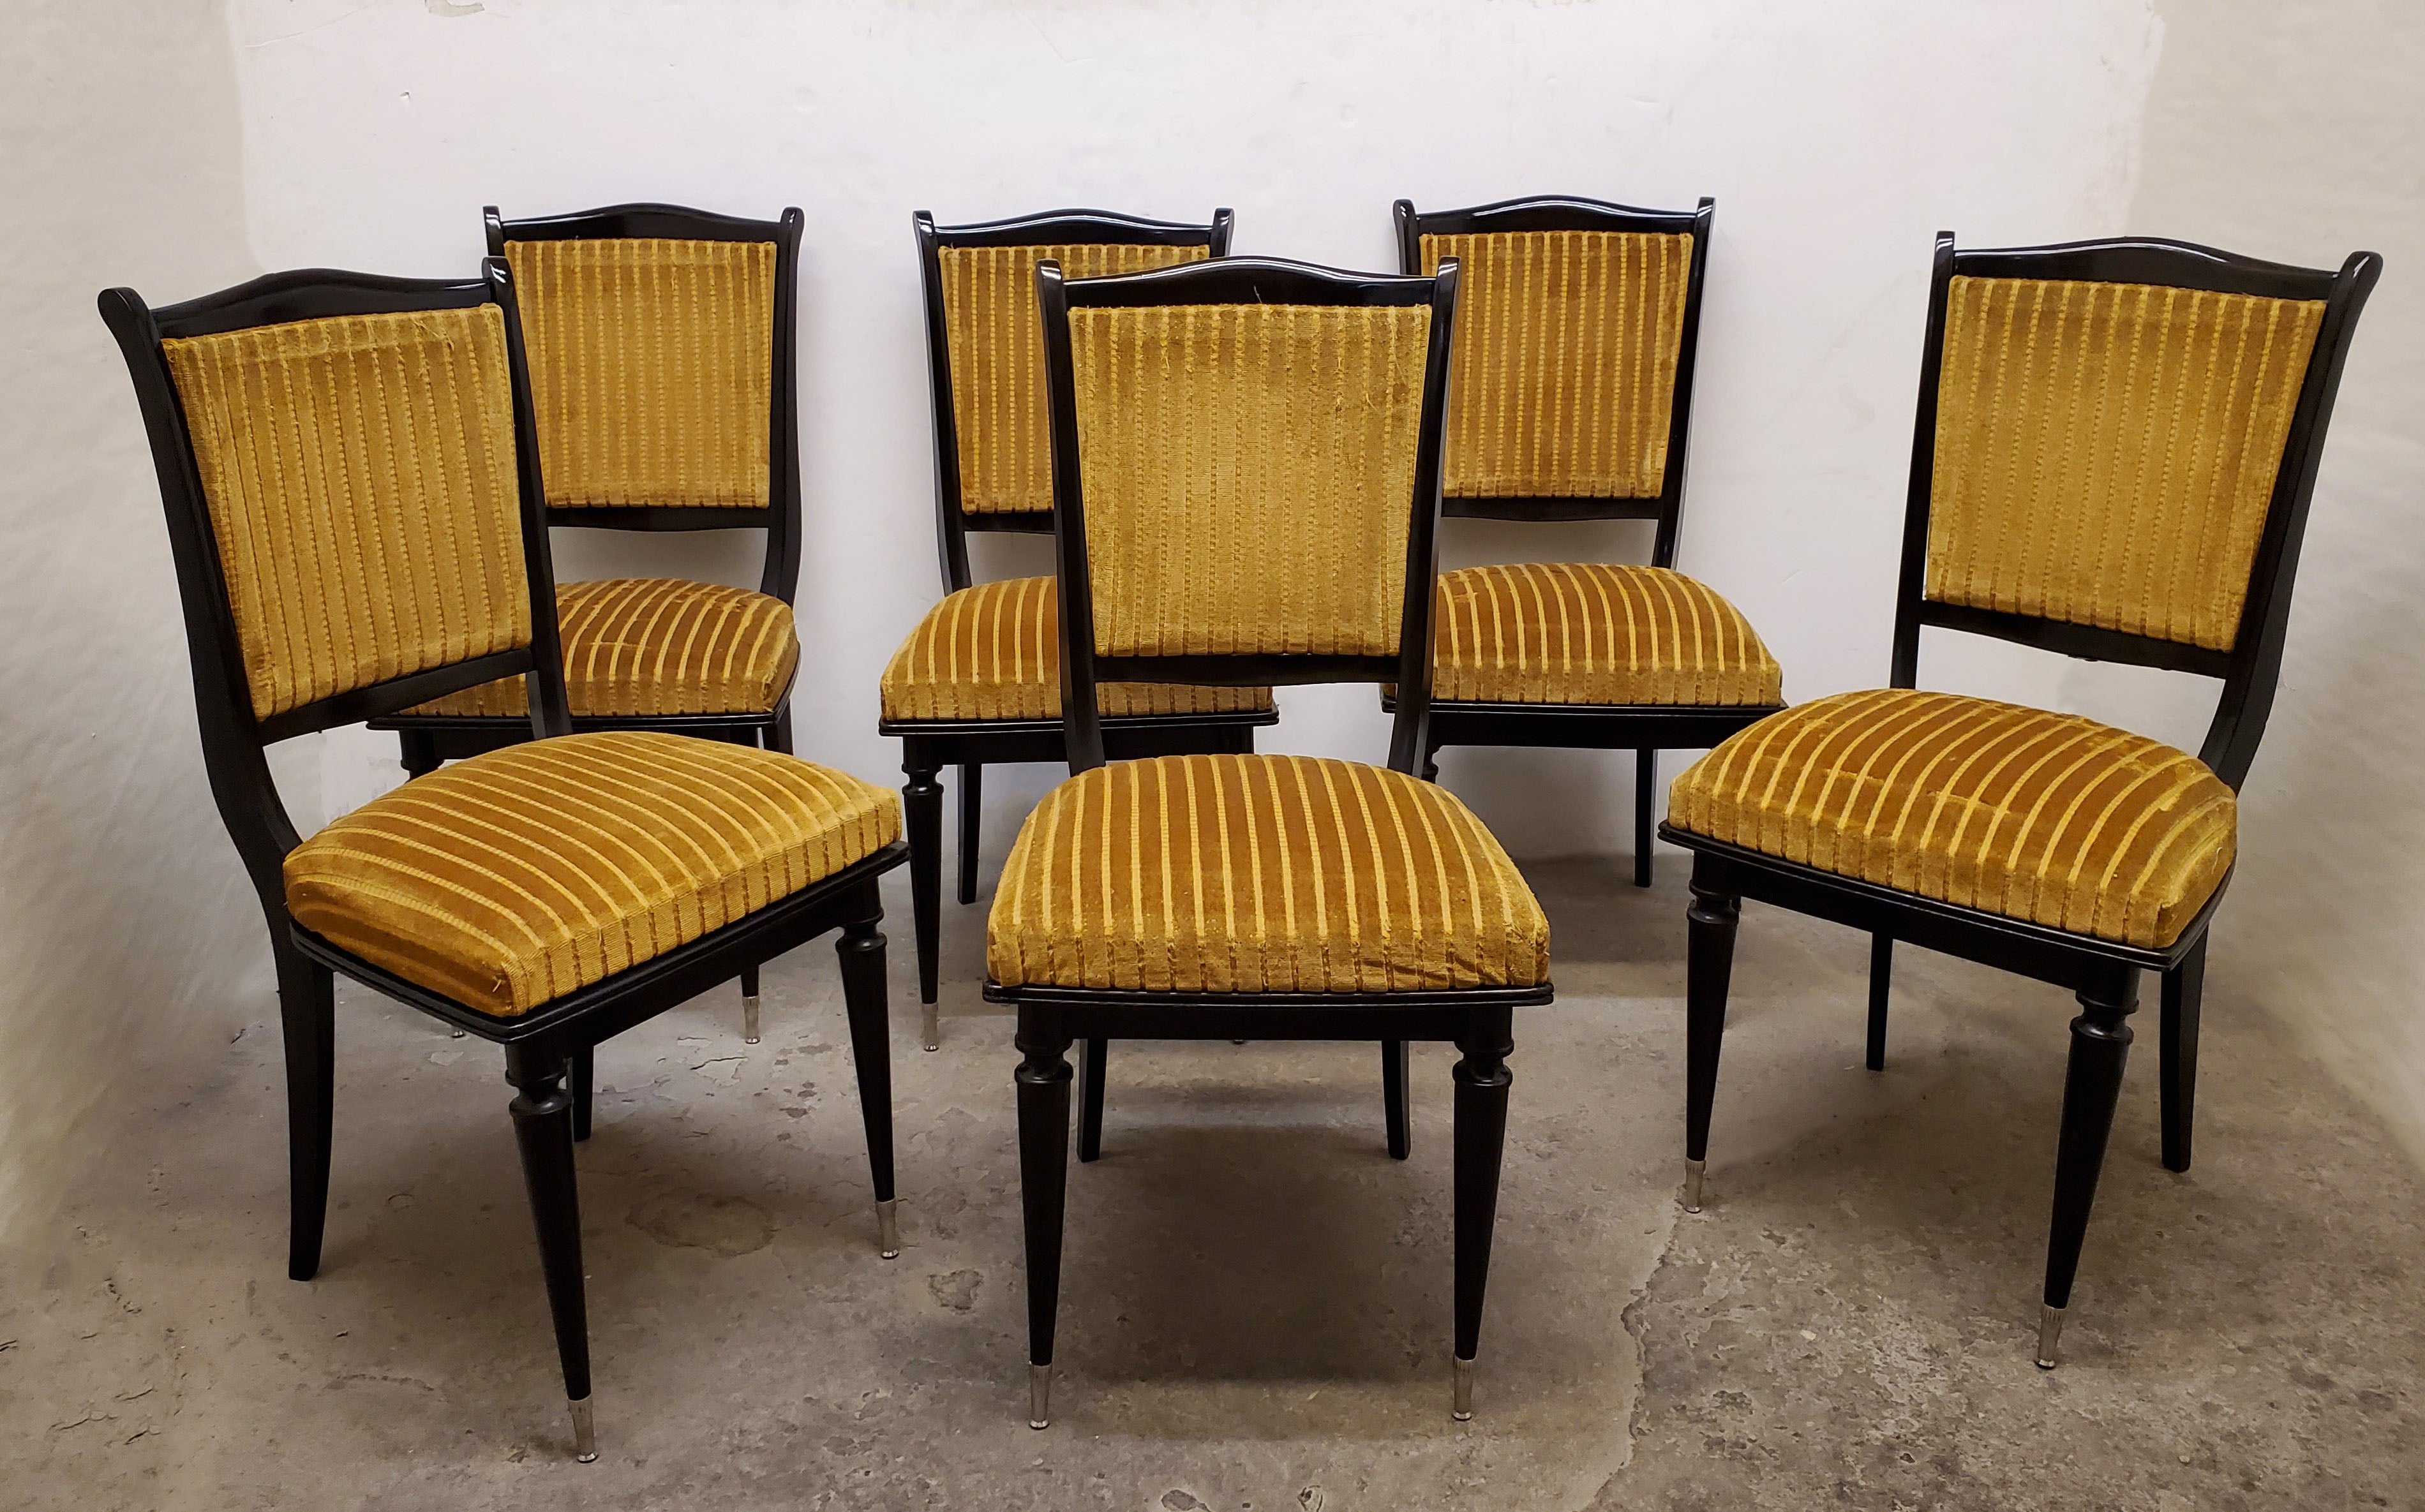 A set of six original French Modernist dining chairs featuring moustache shaped top crest , curved back rest, splay back legs and turned spindle front legs.
The chairs are streamline in overall shape and feature graceful nickeled bronze sabot tipped